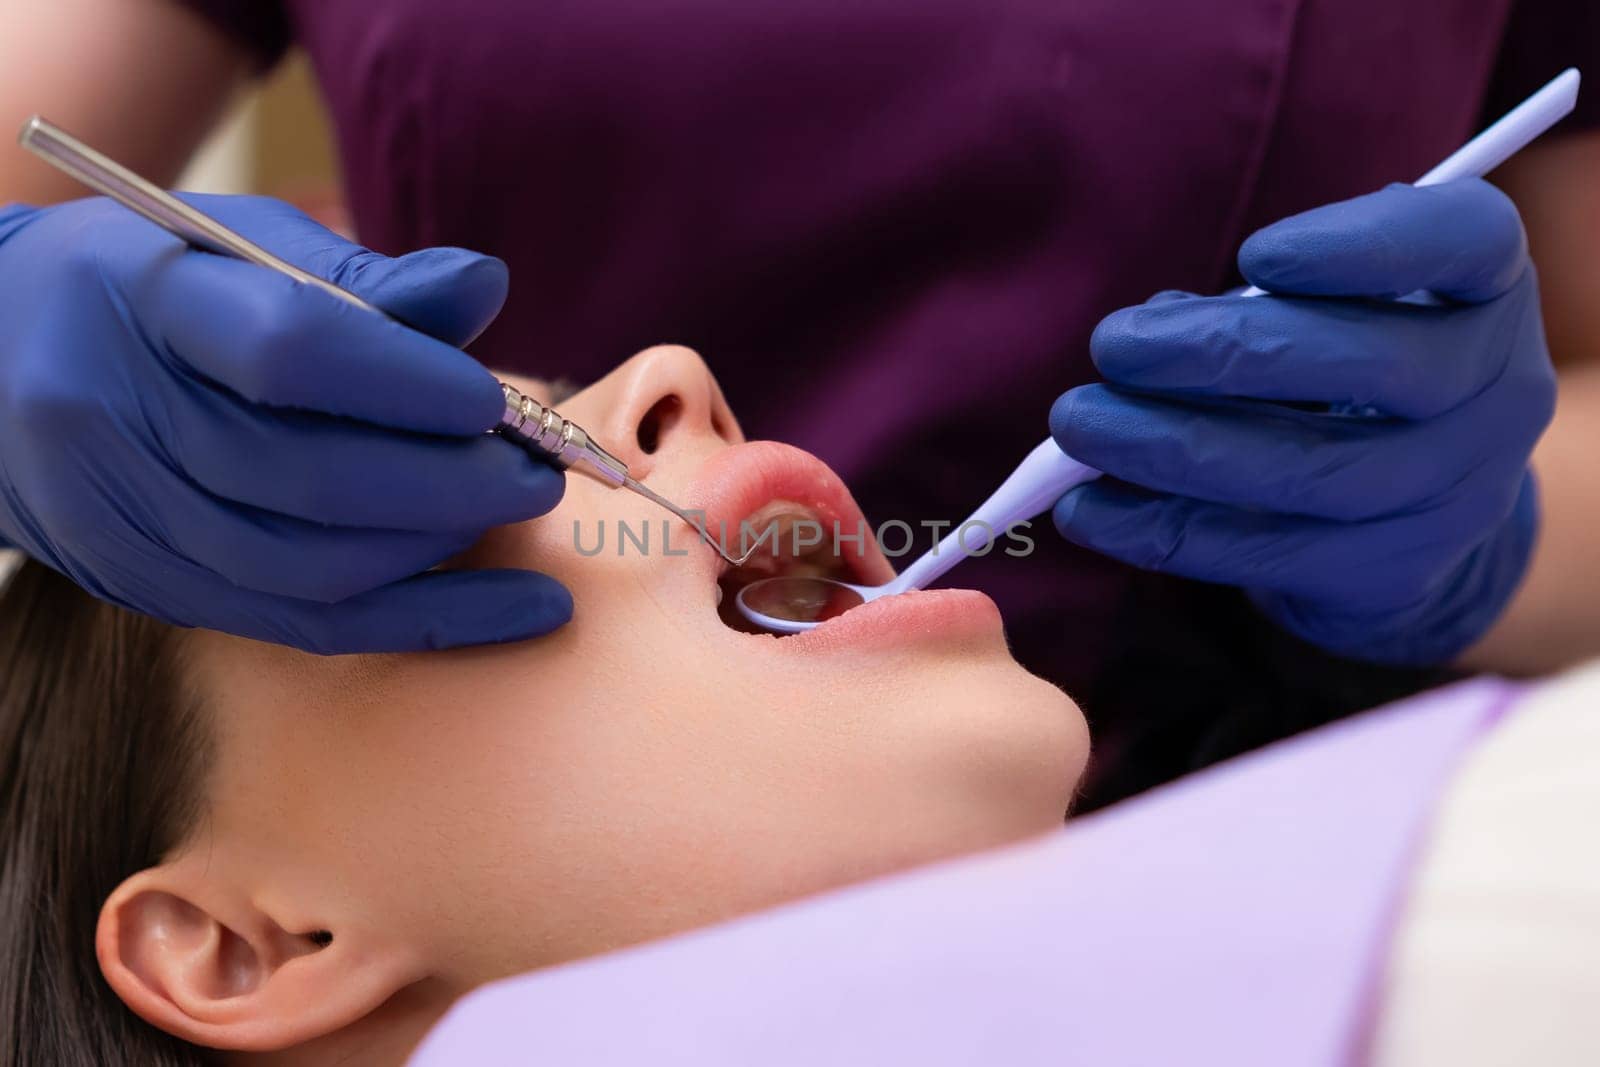 Close up dentist examining teeth of patient during appointment at dental office.